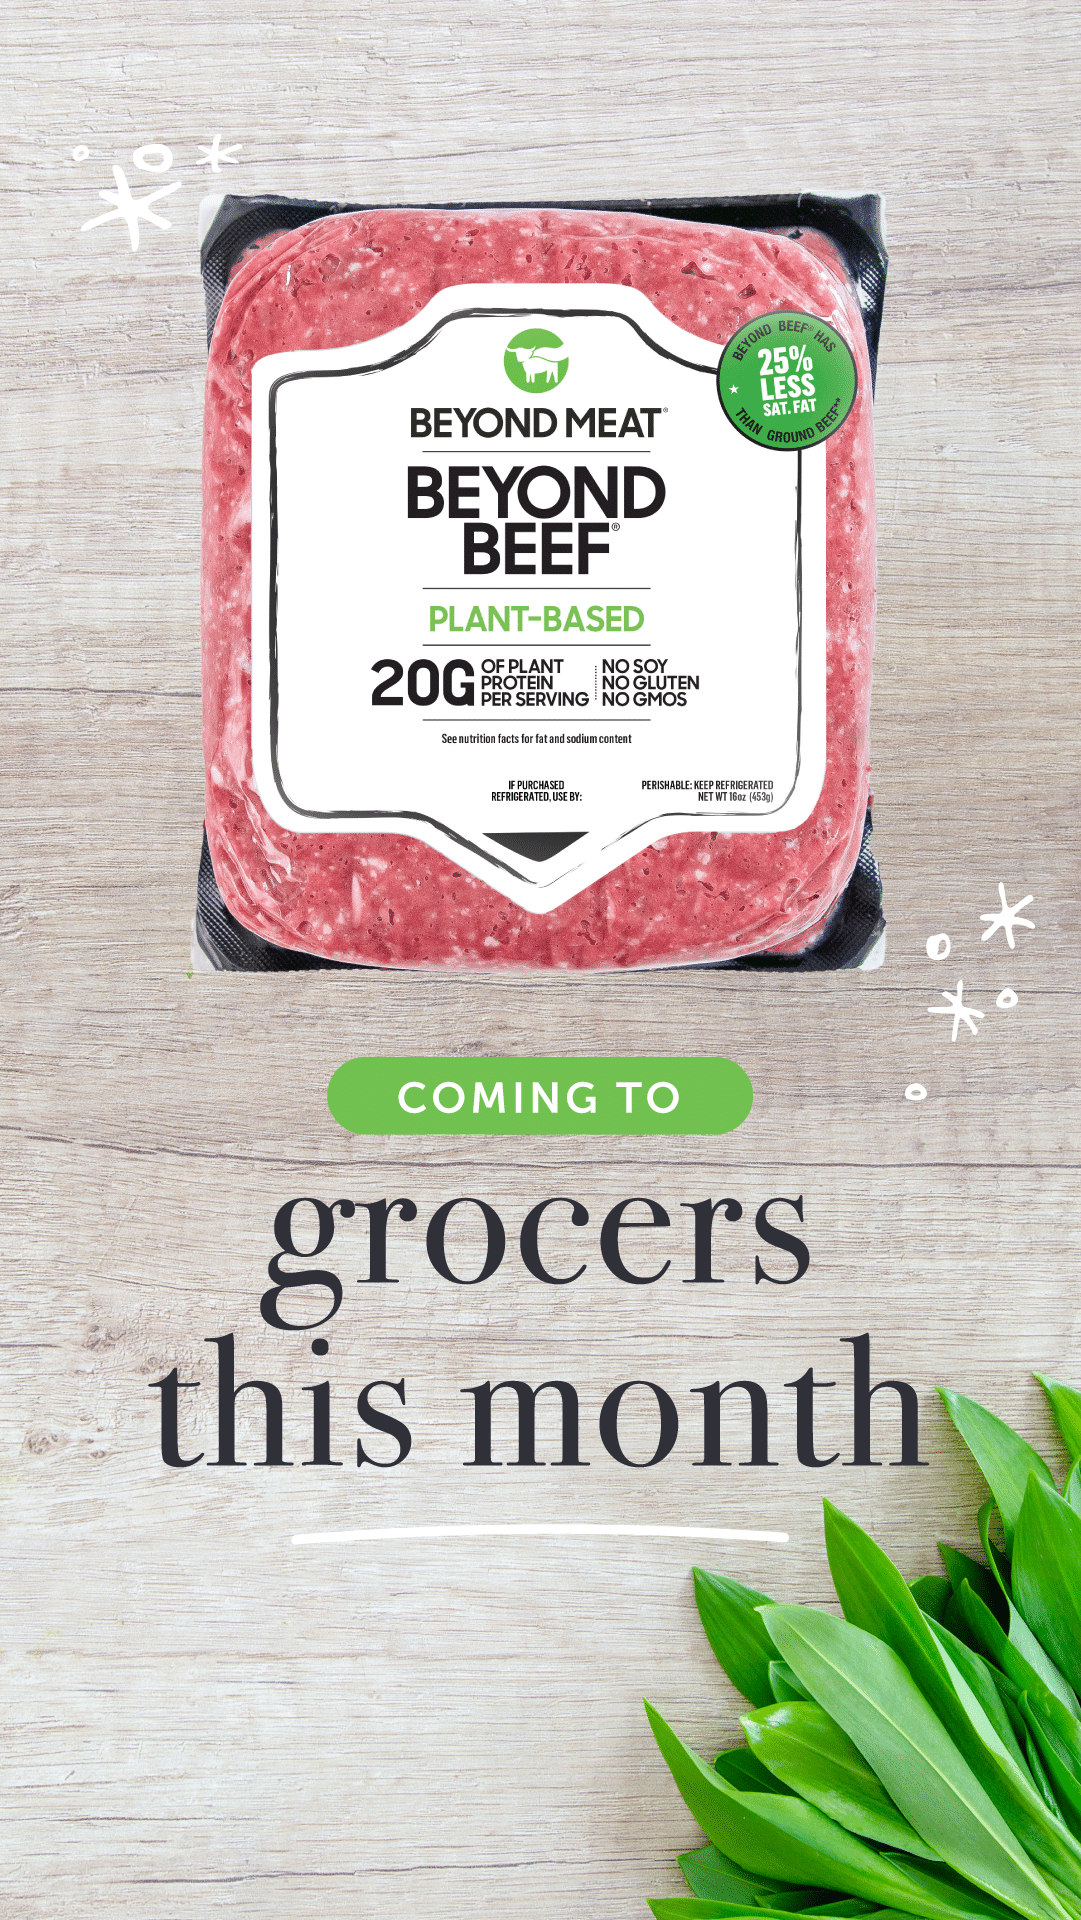 Beyond Meat’s Plant-Based Ground Beef Coming to Grocers This Month